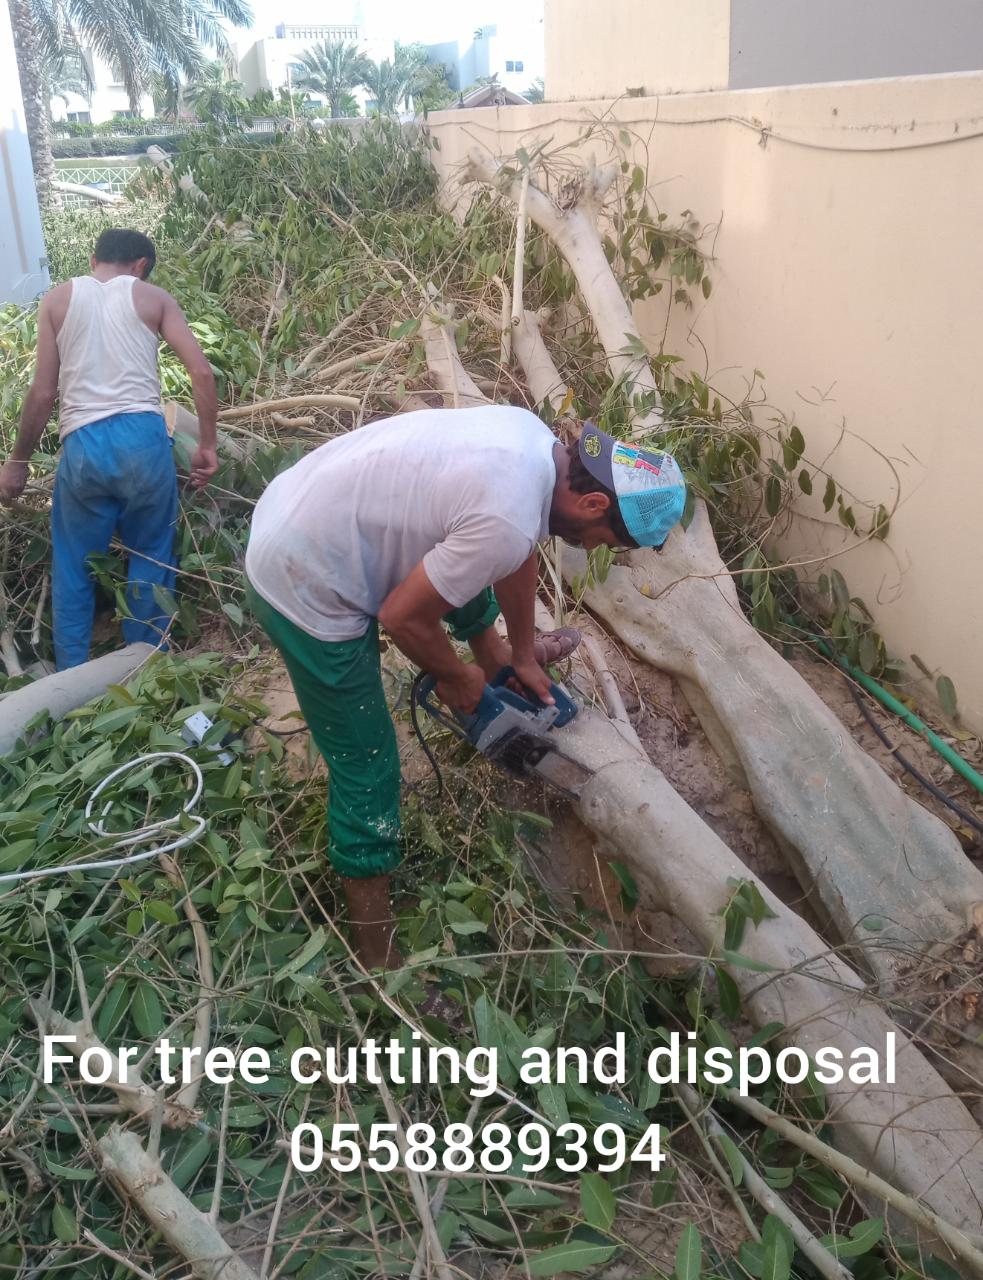 Tree cutting and disposal service